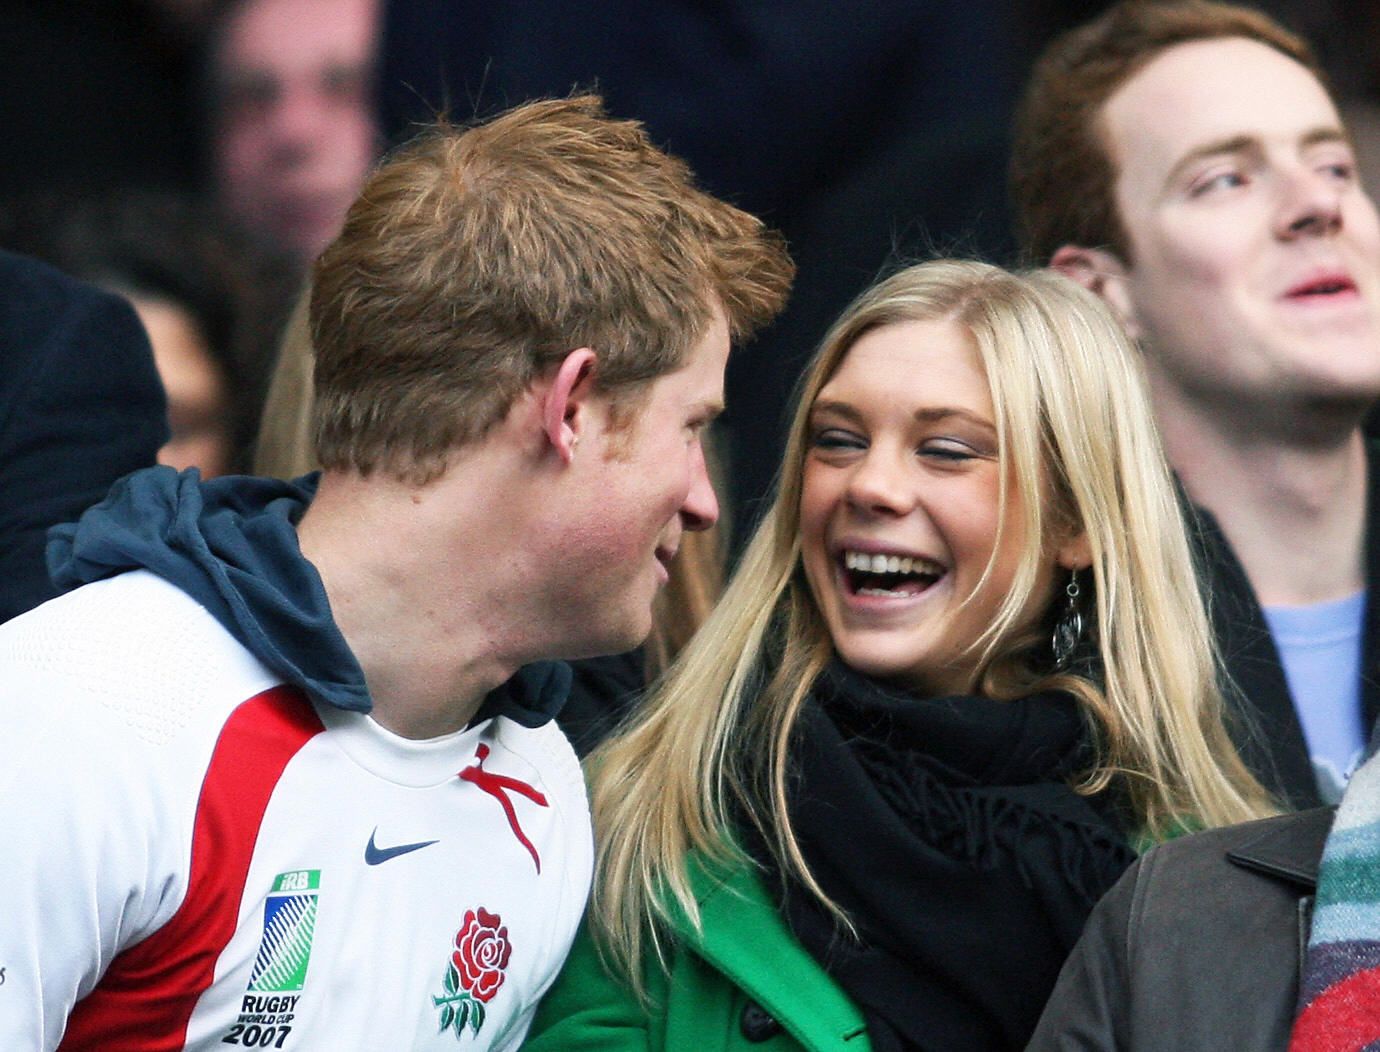 Everything Prince Harry Said About His Ex Chelsy Davy in Spare image pic